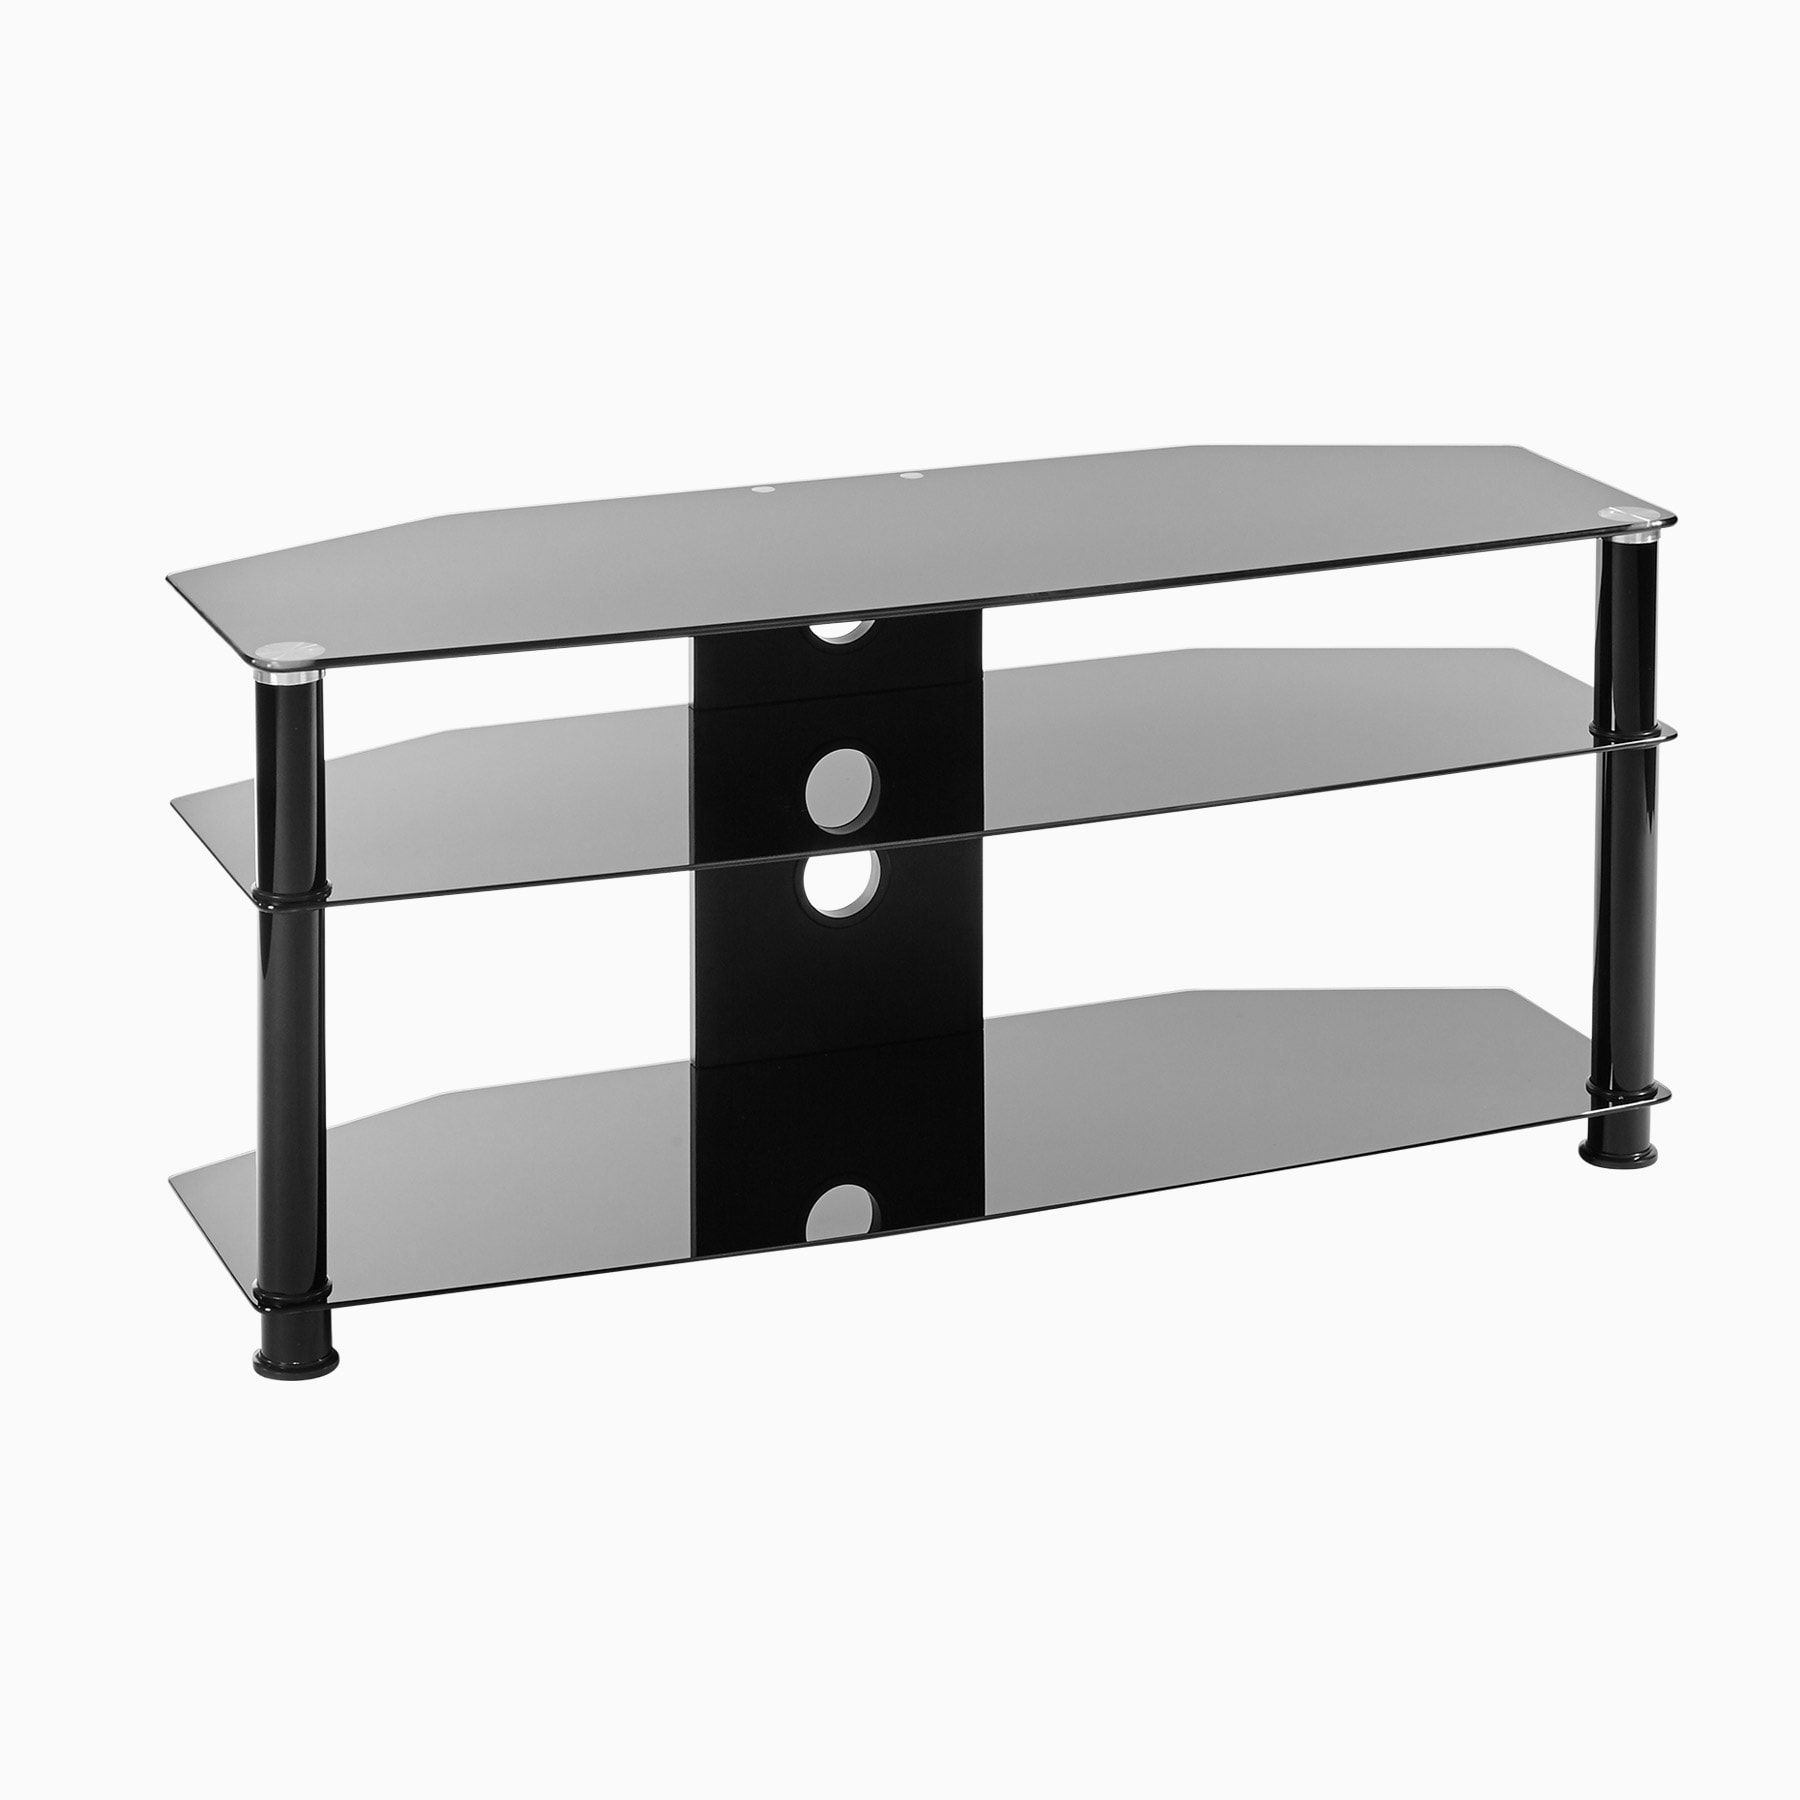 Black Glass Corner Tv Stand Up To 37 Inch Tv | Mmt Db800 Within Tv Glass Stands (View 12 of 15)